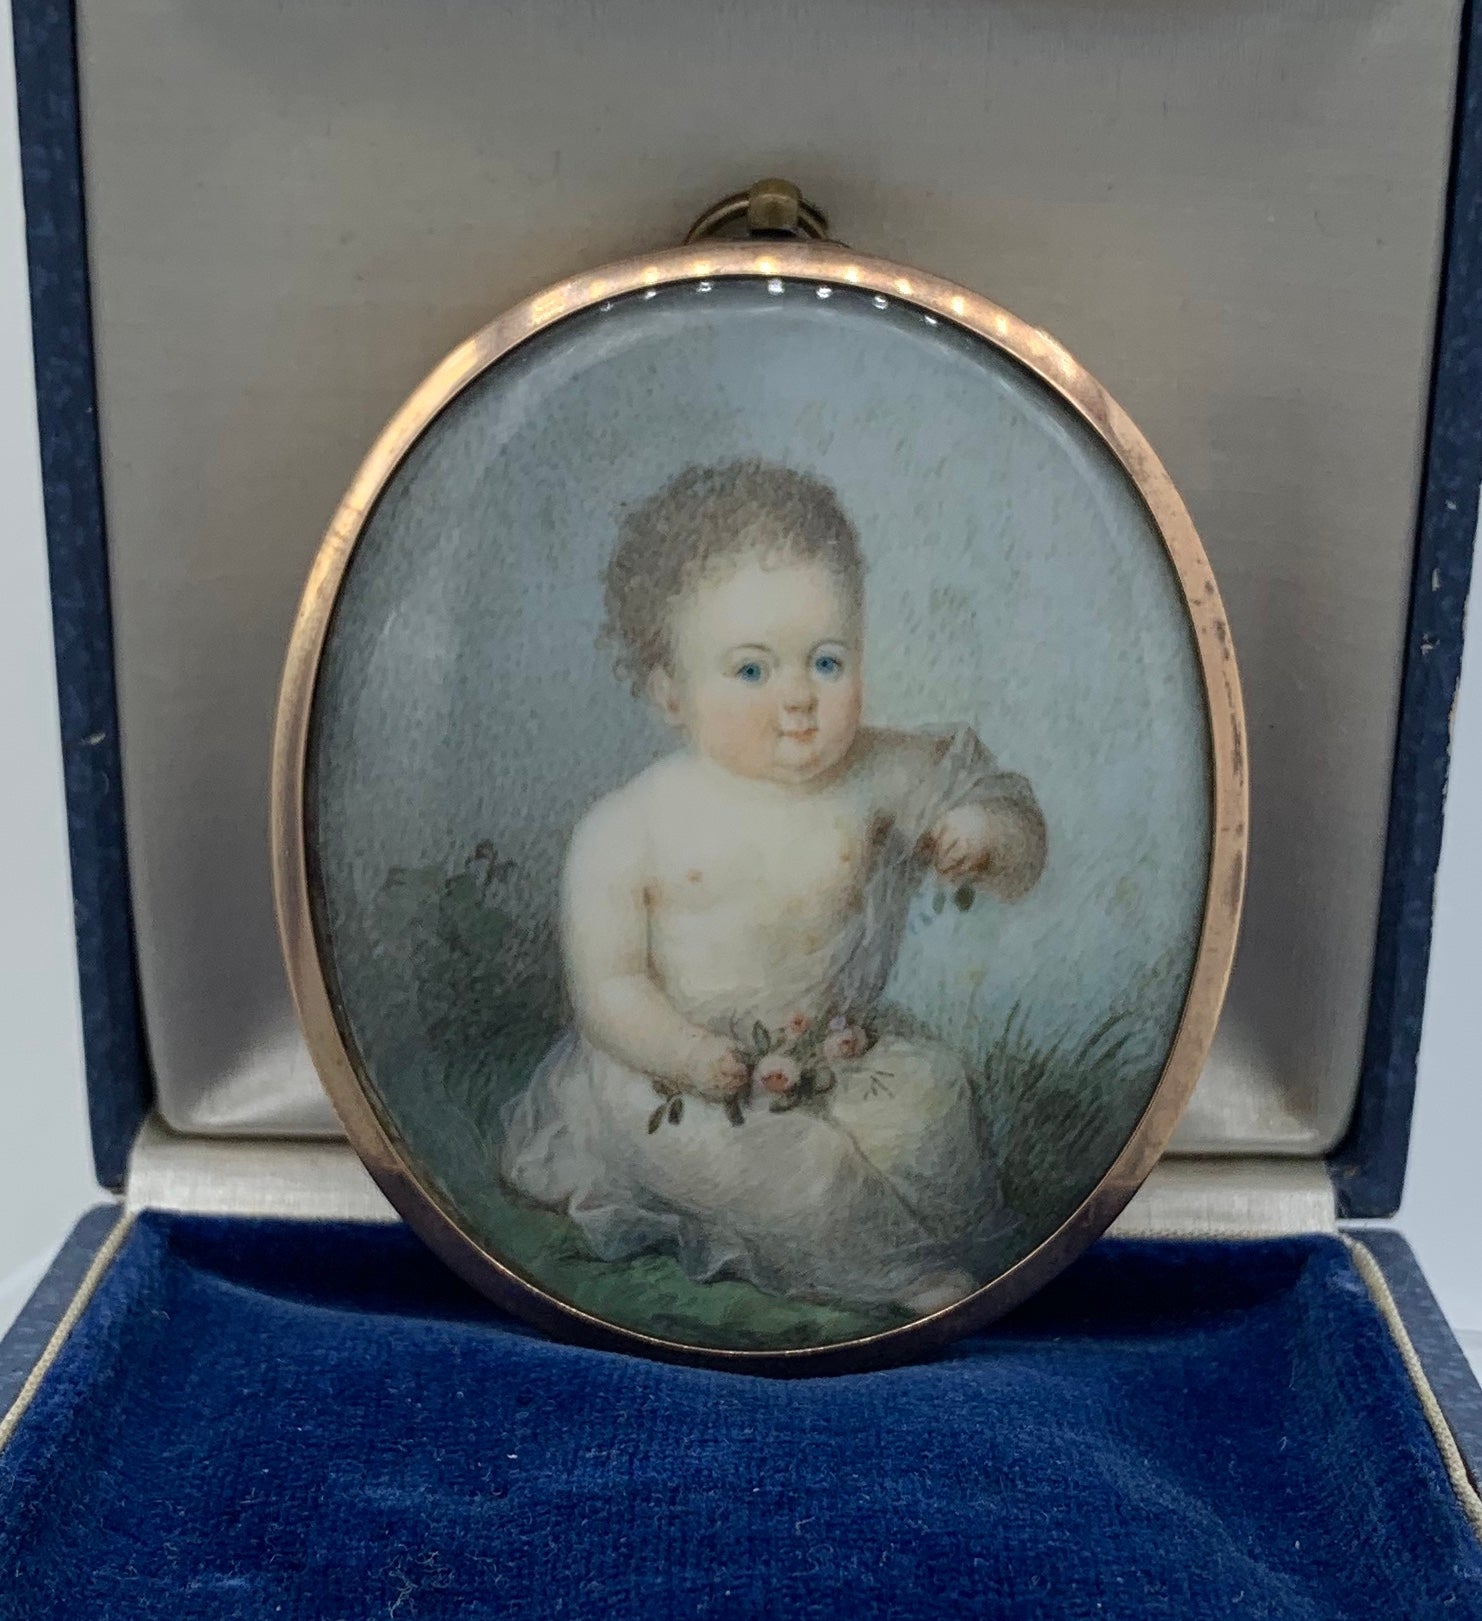 This is a very early and rare Museum Quality Georgian Locket Pendant Necklace with an extraordinary hand painted portrait miniature of a child in a field of grass with a bouquet of roses and in a 10-12 Karat Gold Locket Frame.  The portrait